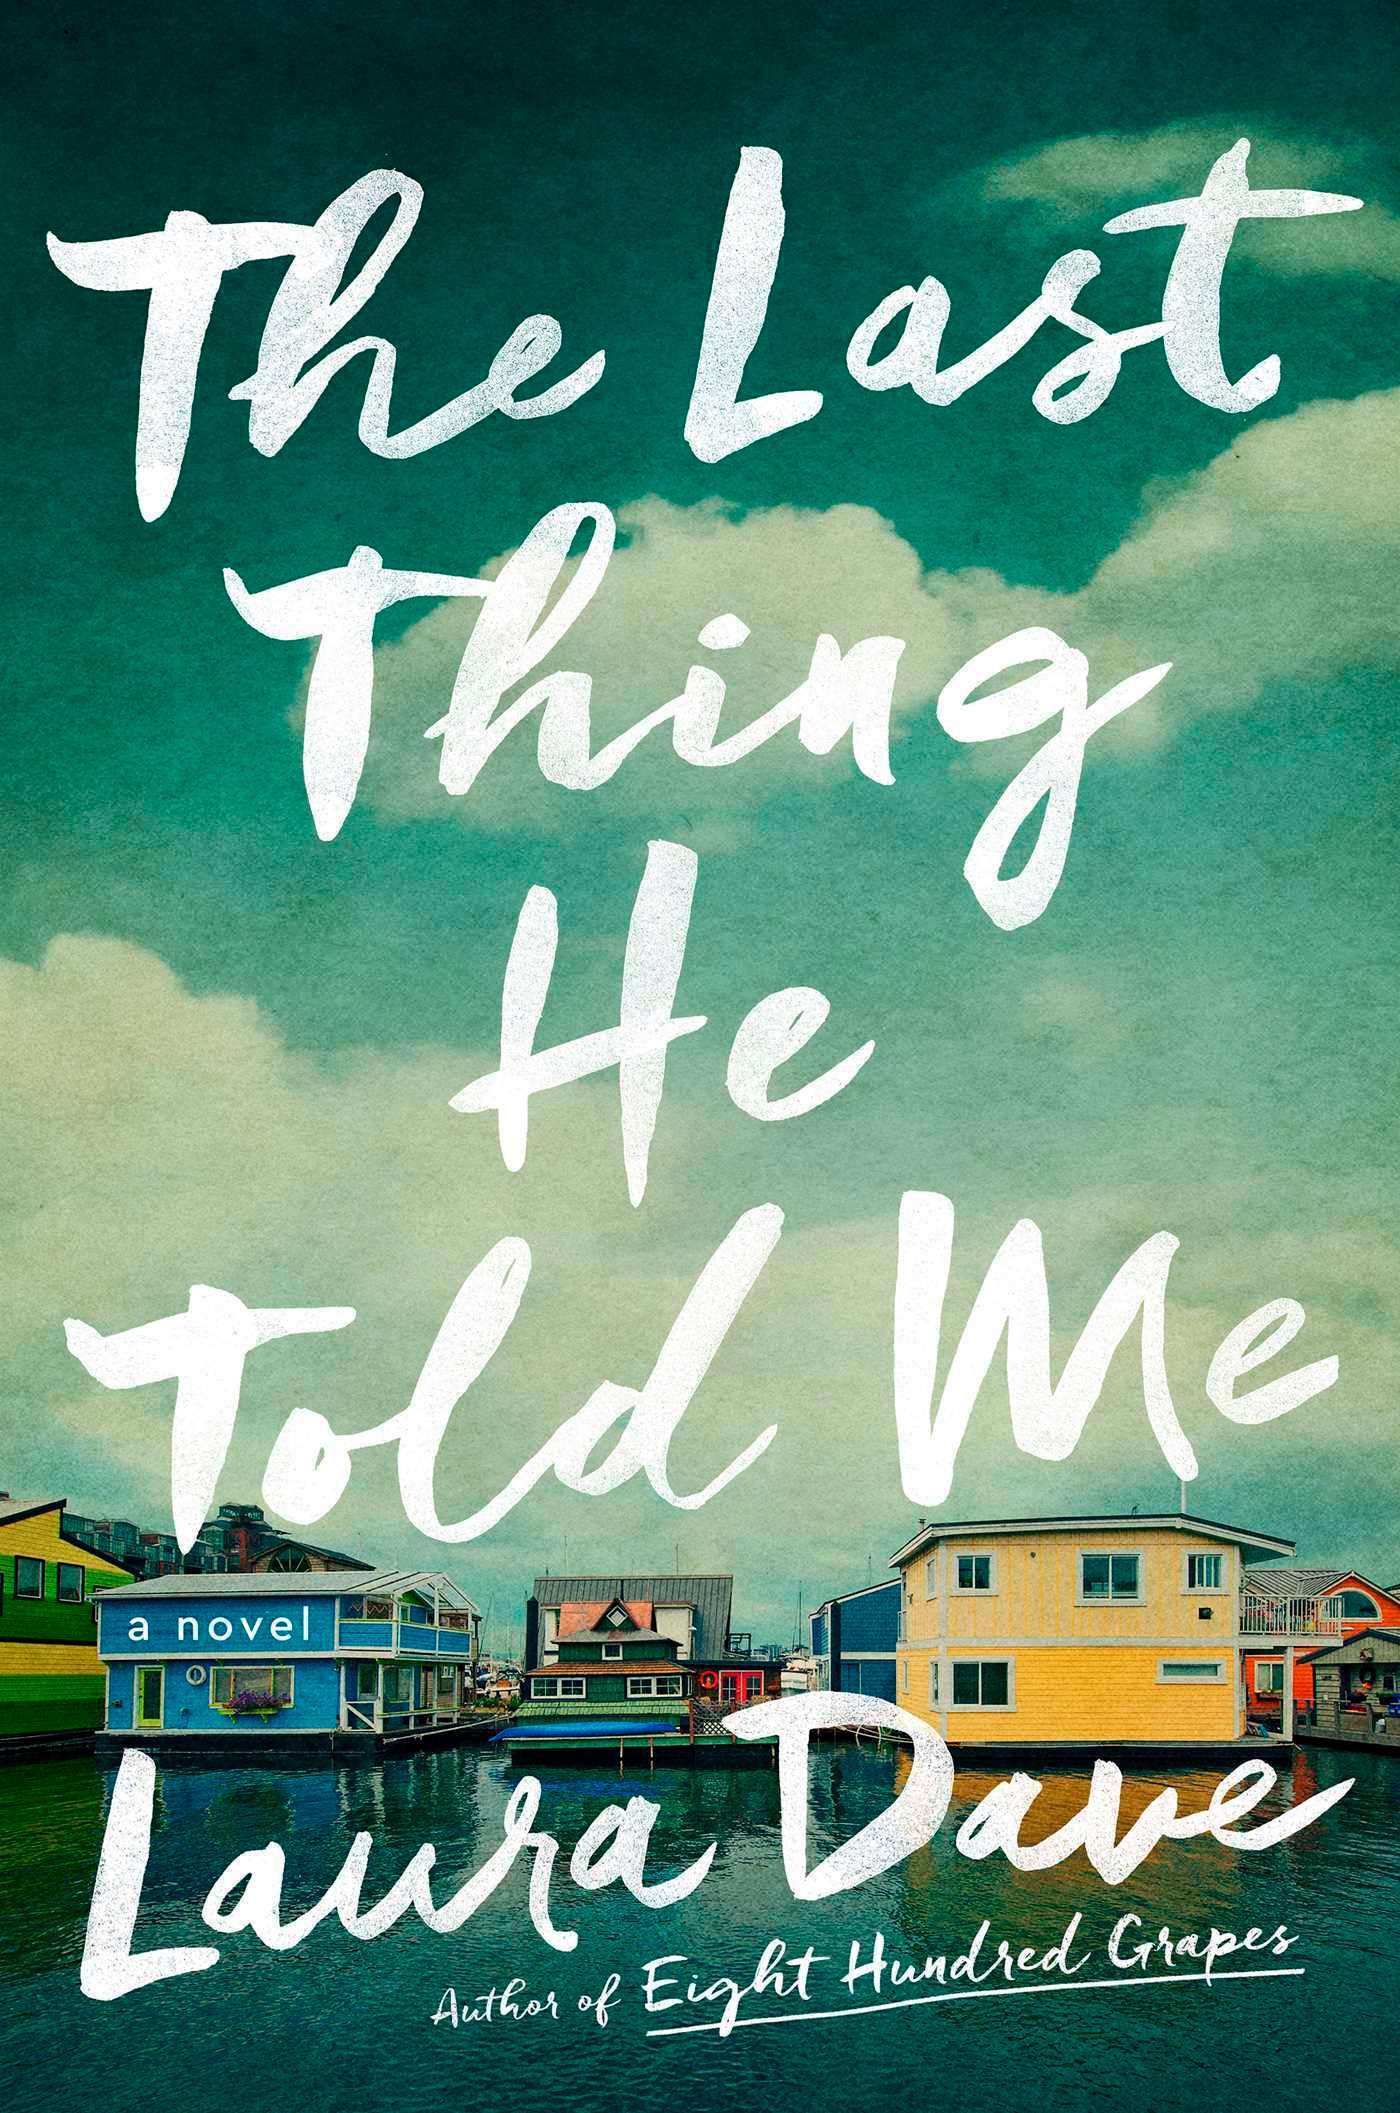 Book Review - The Last Thing He Told Me